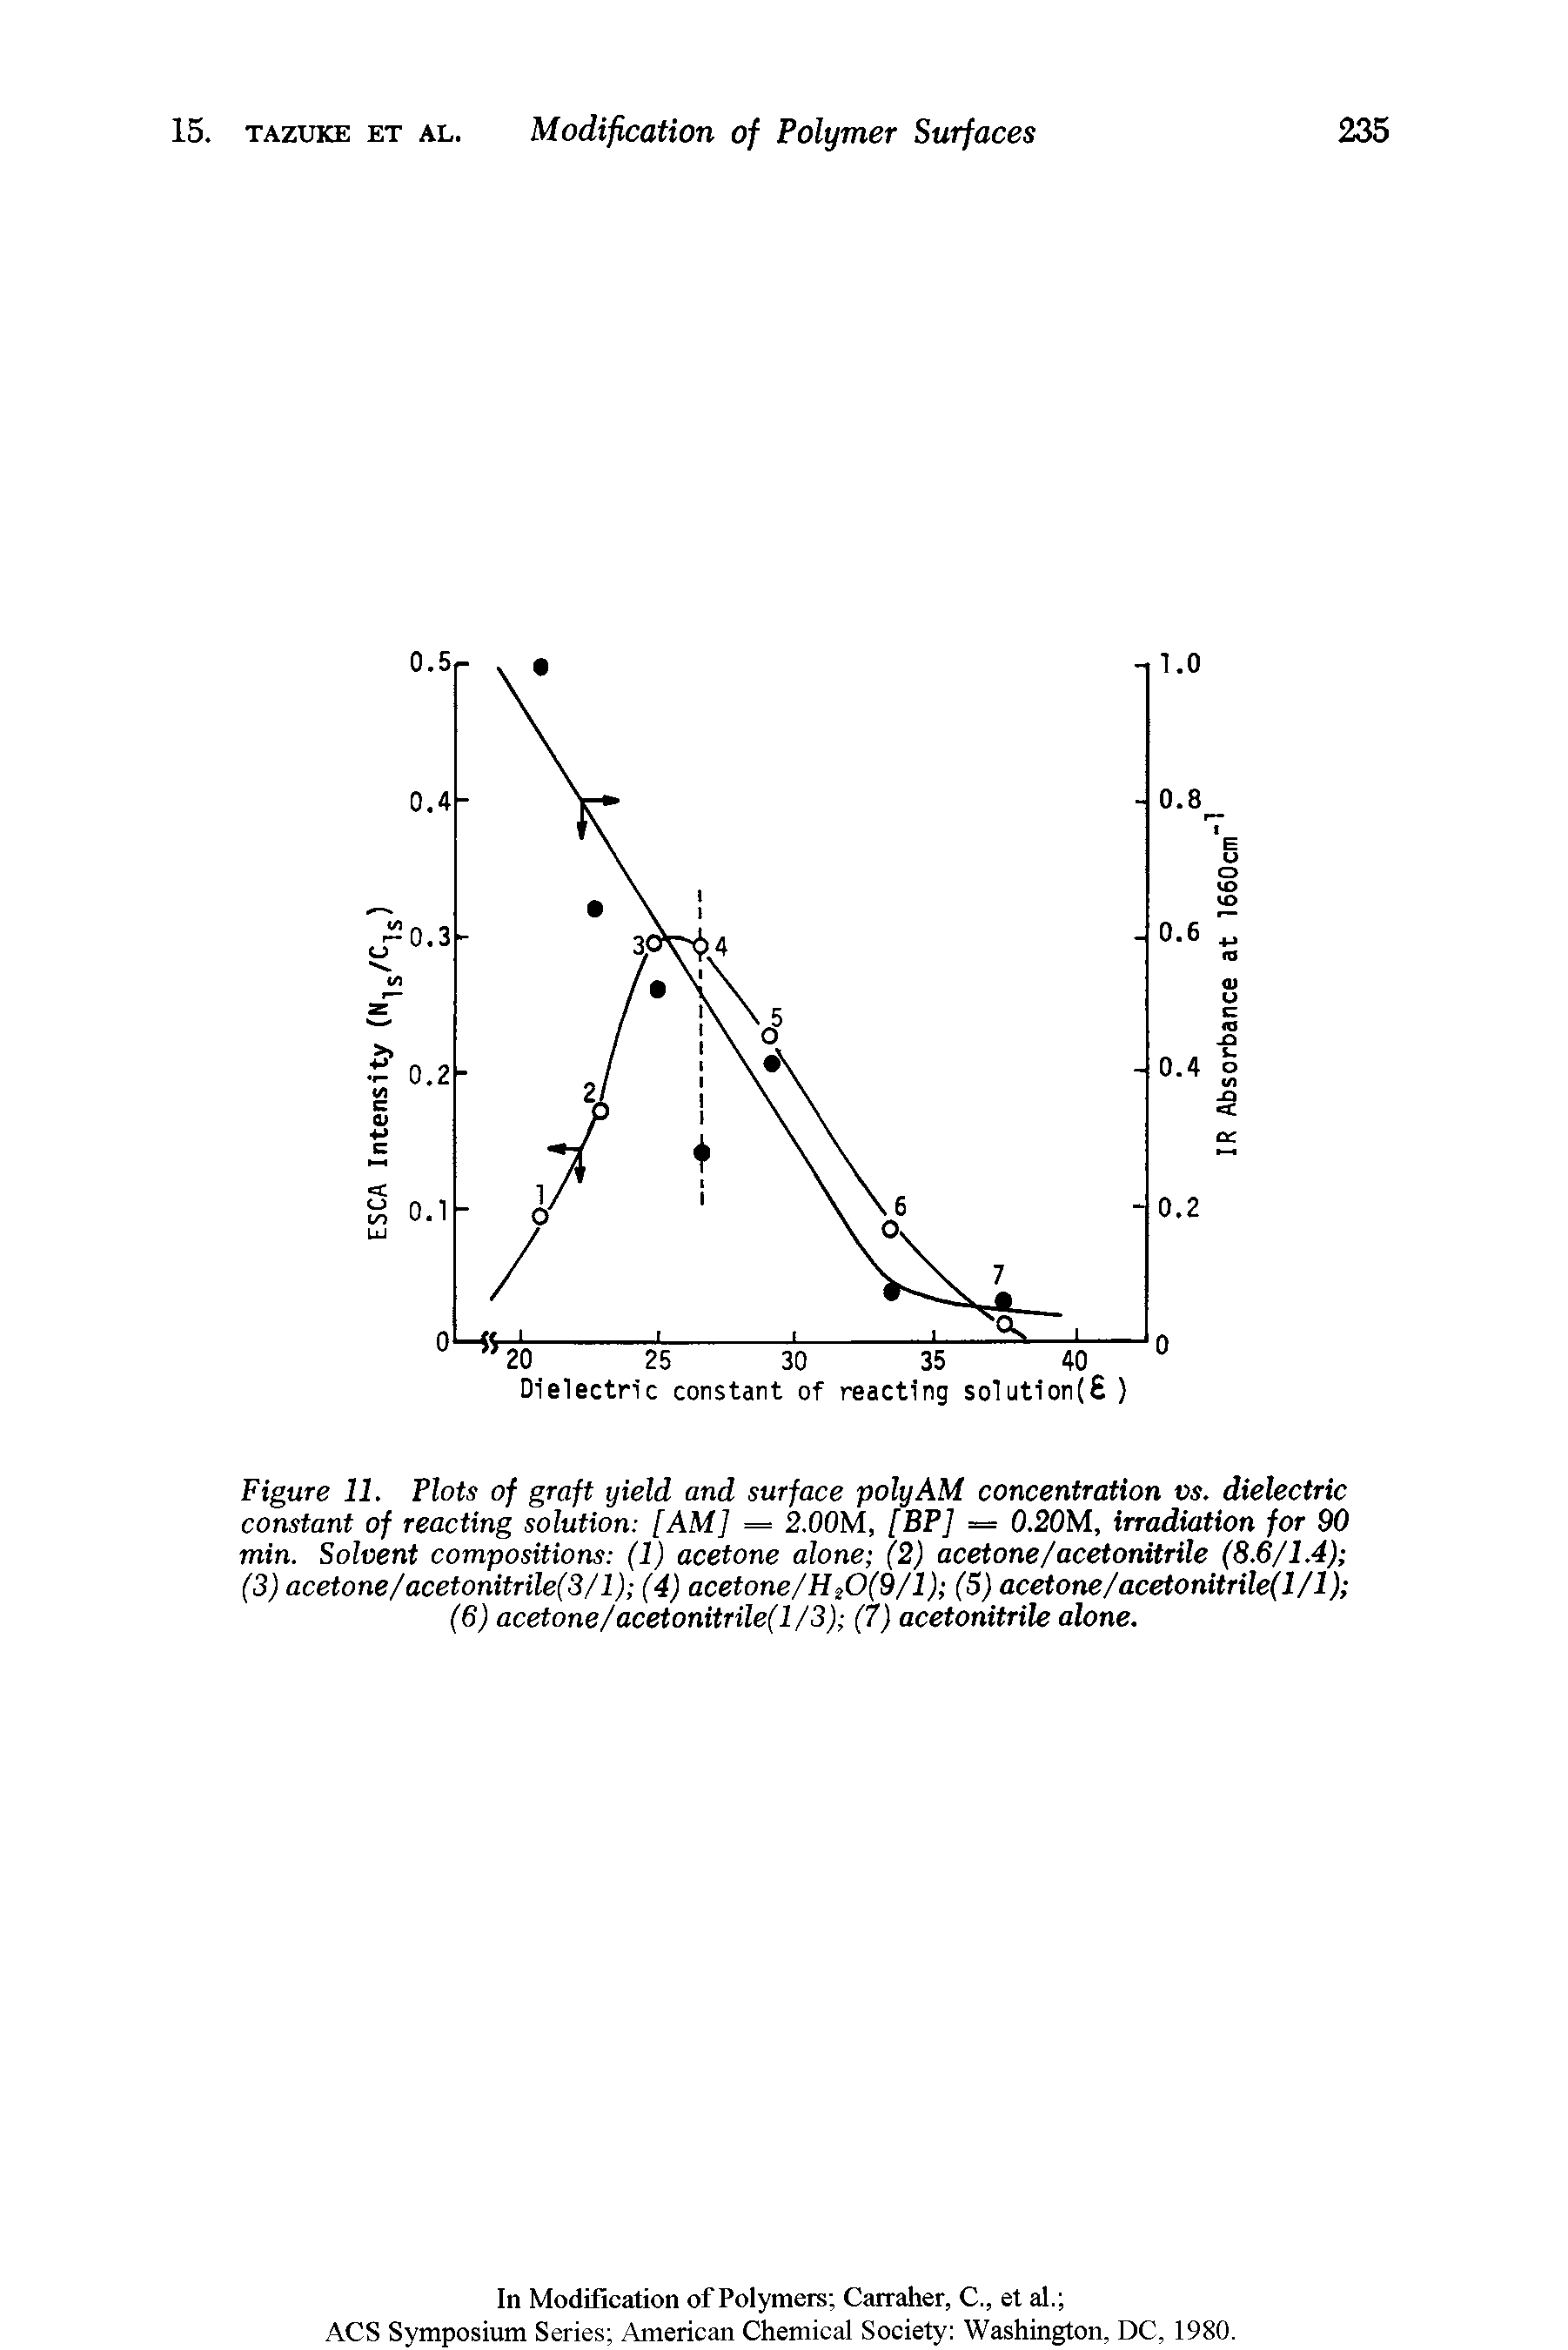 Figure 11. Plots of graft yield and surface polyAM concentration vs. dielectric constant of reacting solution [AM] = 2.00M, [BP] = 0.20M, irradiation for 90 min. Solvent compositions (1) acetone alone (2) acetone/acetonitrile (8.6/1.4) (3) acetone/acetonitrile(3/l) (4) acetone/Hs0(9/1) (5) acetone/acetonitrile(l/l) (6) acetone/acetonitrile] 1/3) (7) acetonitrile alone.